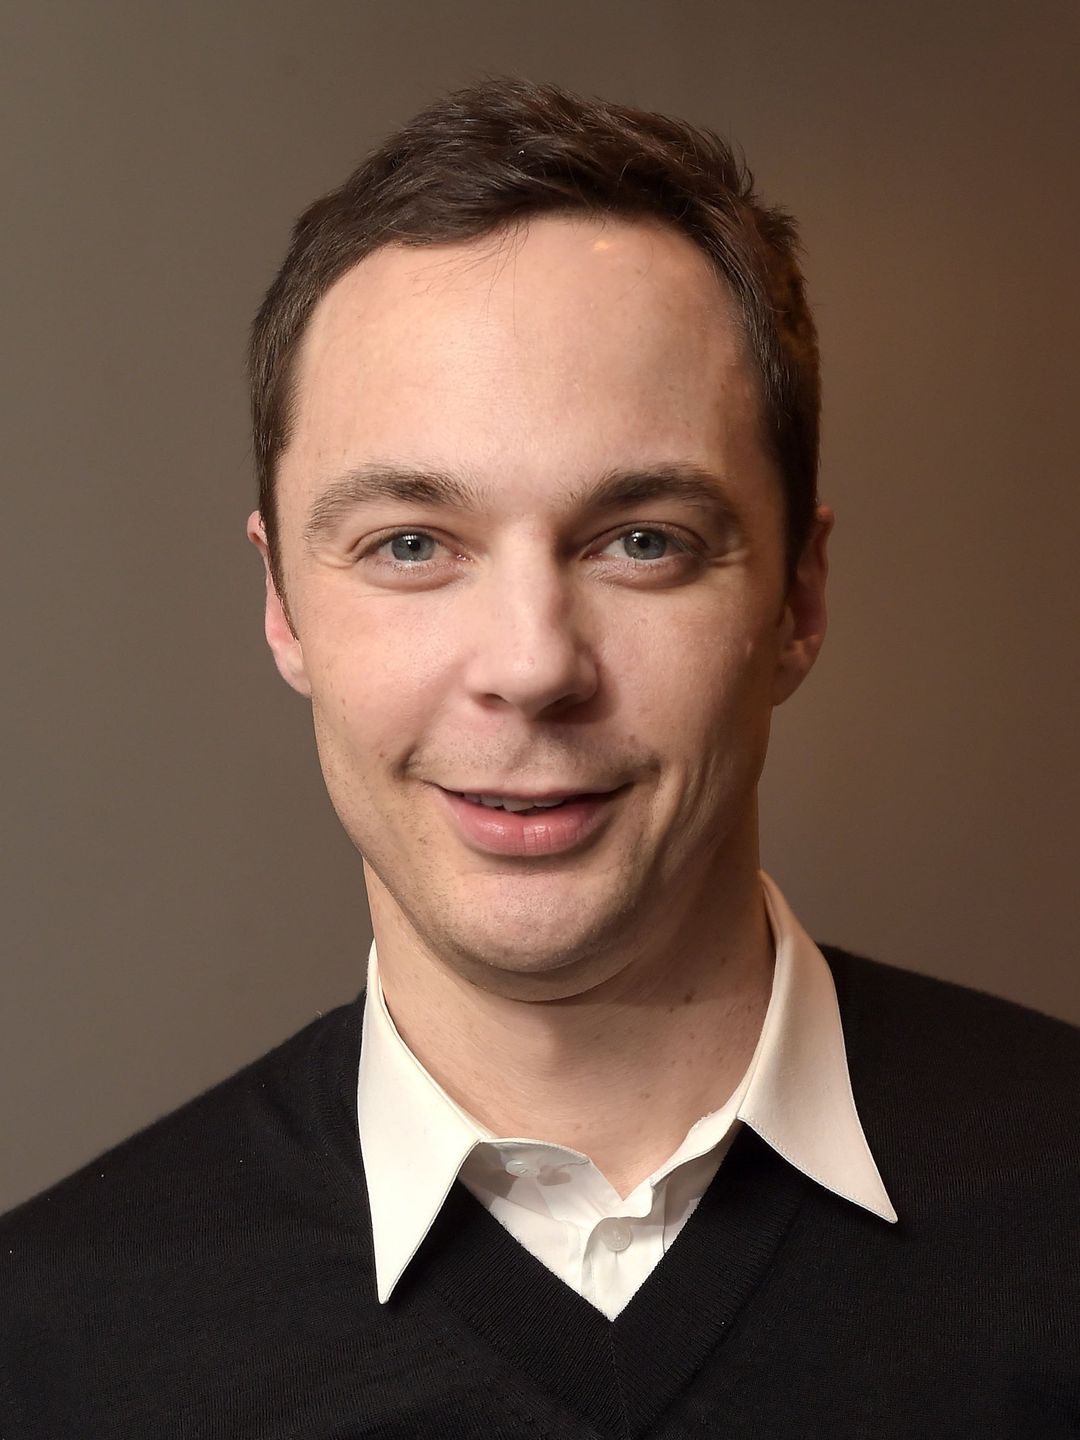 Jim Parsons date of birth